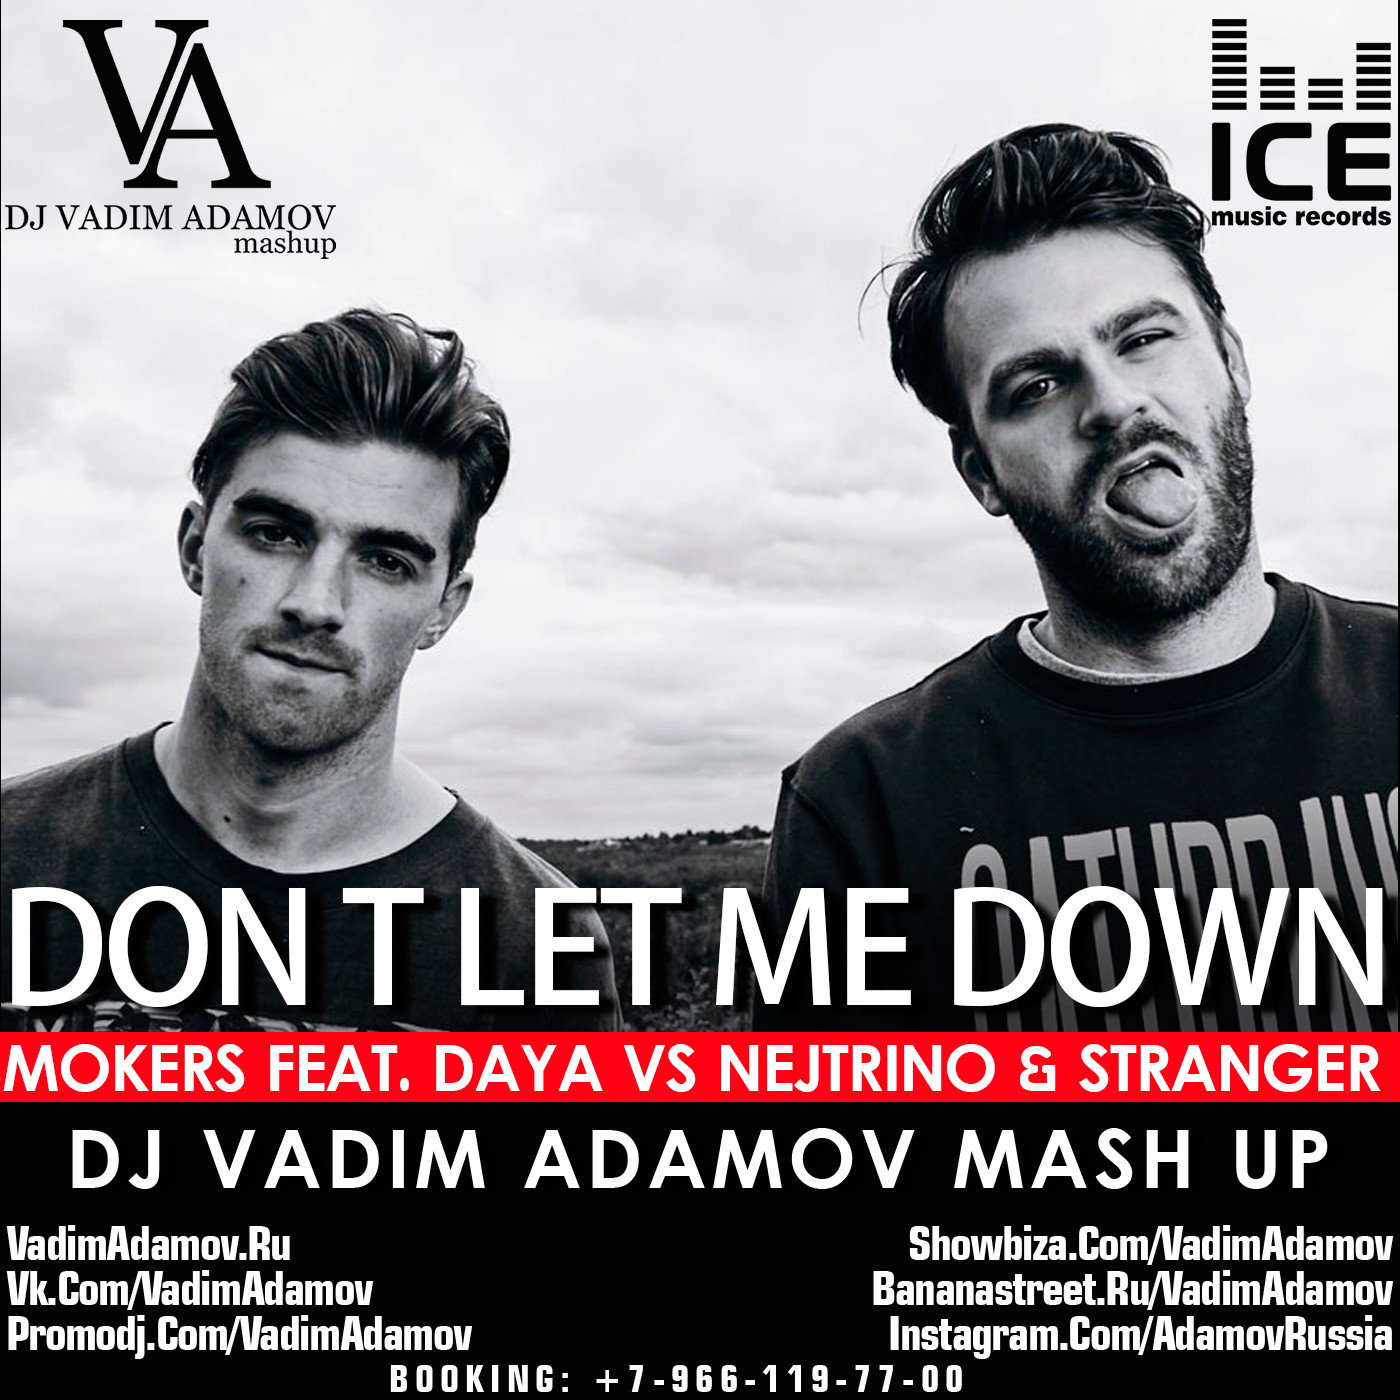 Vadim Adamov - Let go (1). The chainsmokers feat daya don t